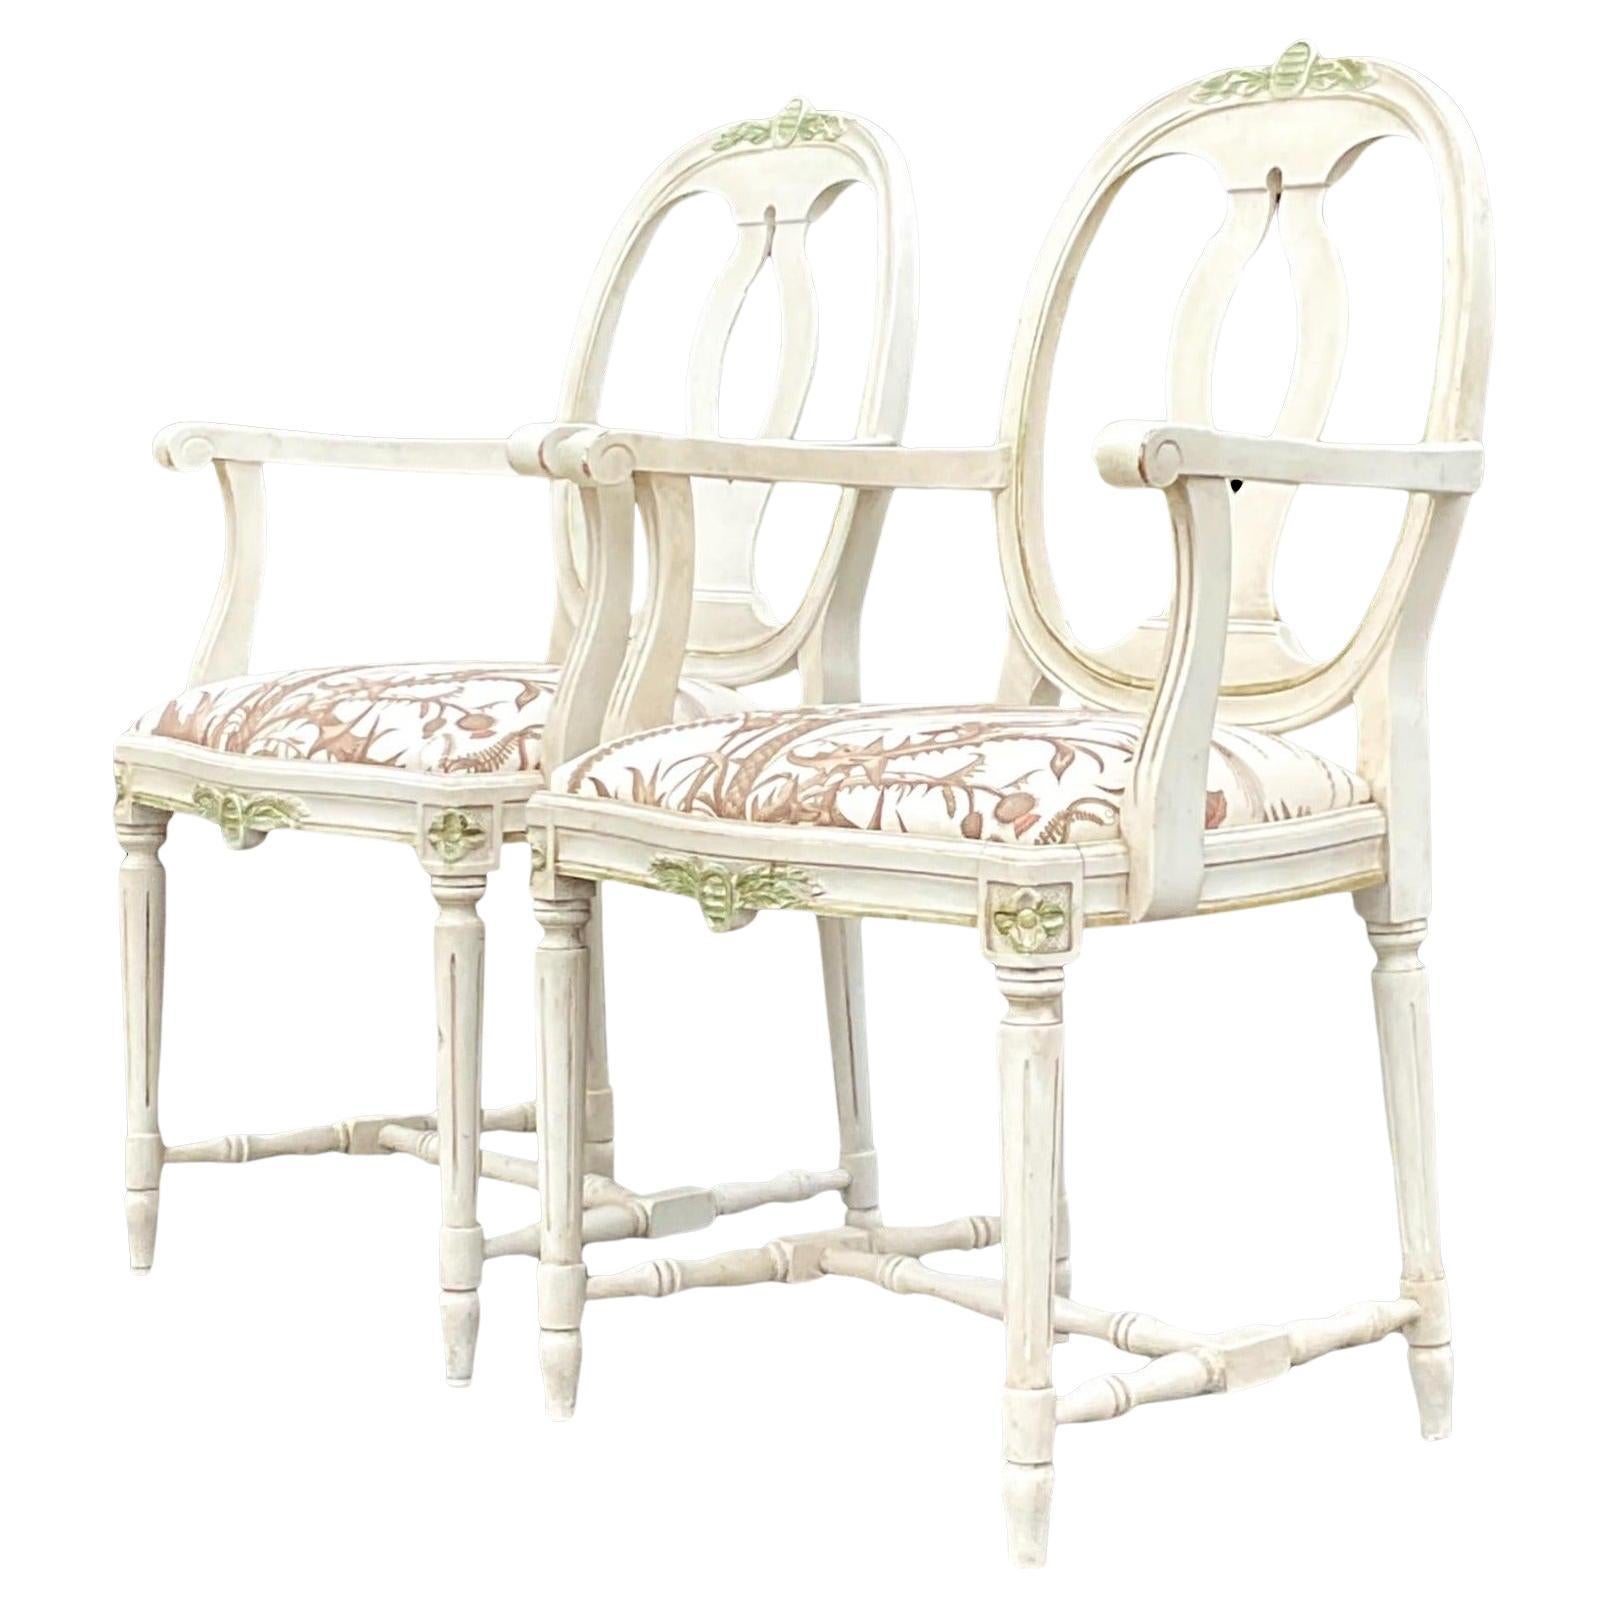 Vintage Regency Swedish Gustavian Arm Chairs - a Pair For Sale